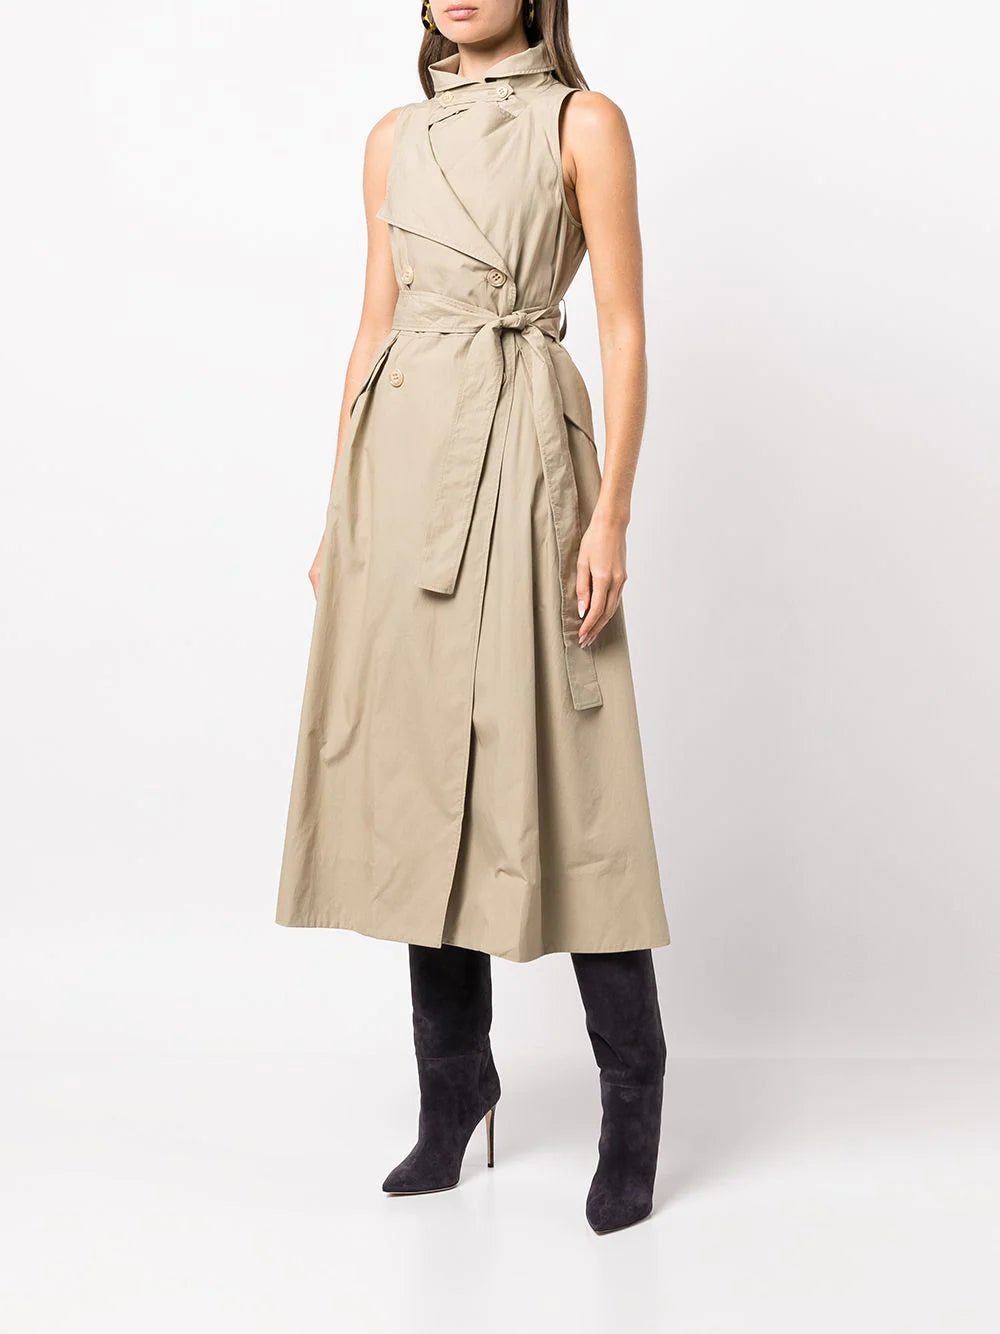 Paper touch ease dress by Dorothee Schumacher